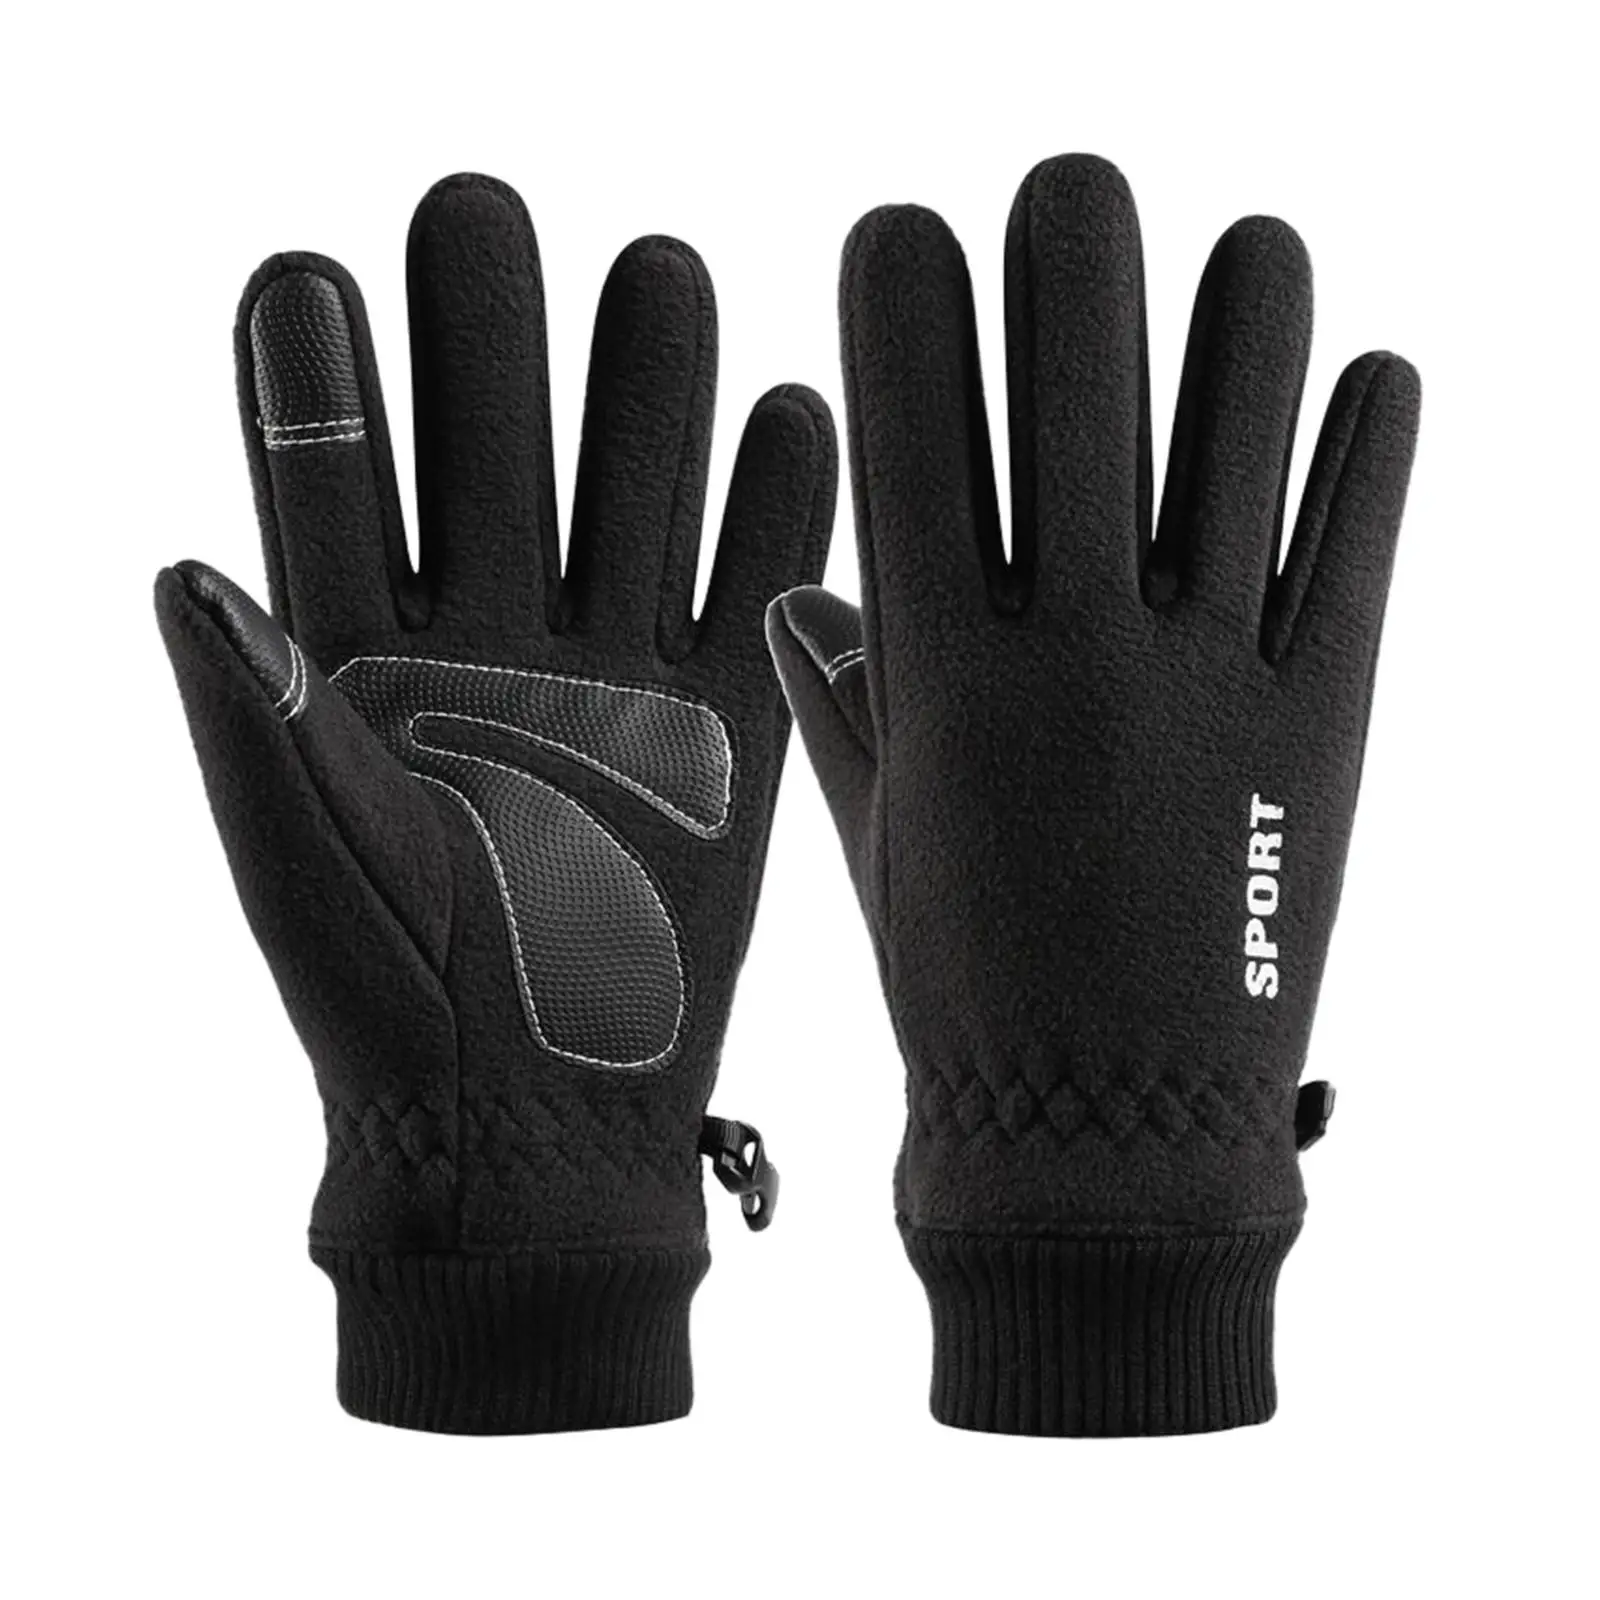 Winter Warm Gloves Cold Weather Gloves for Running Hiking Adults Unisex